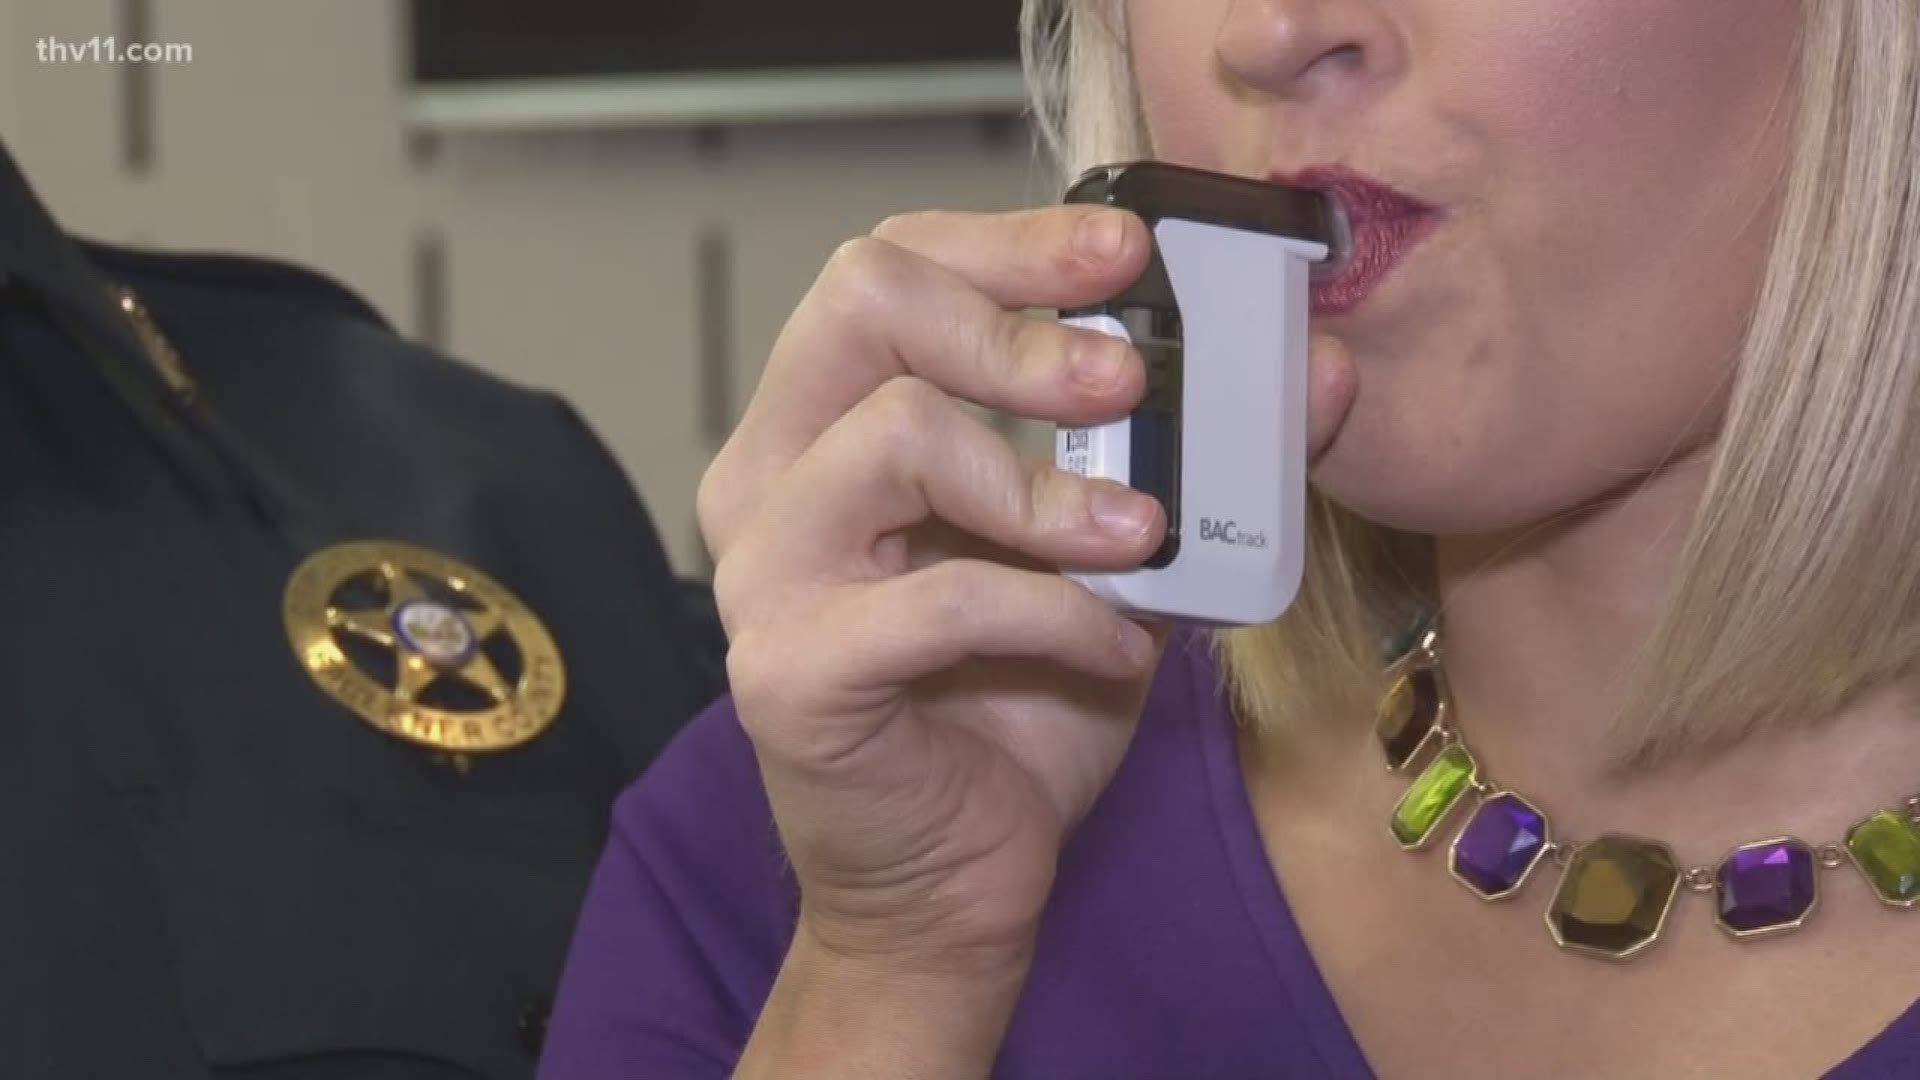 New DWI technology may help reduce repeat offenses of drunk driving.